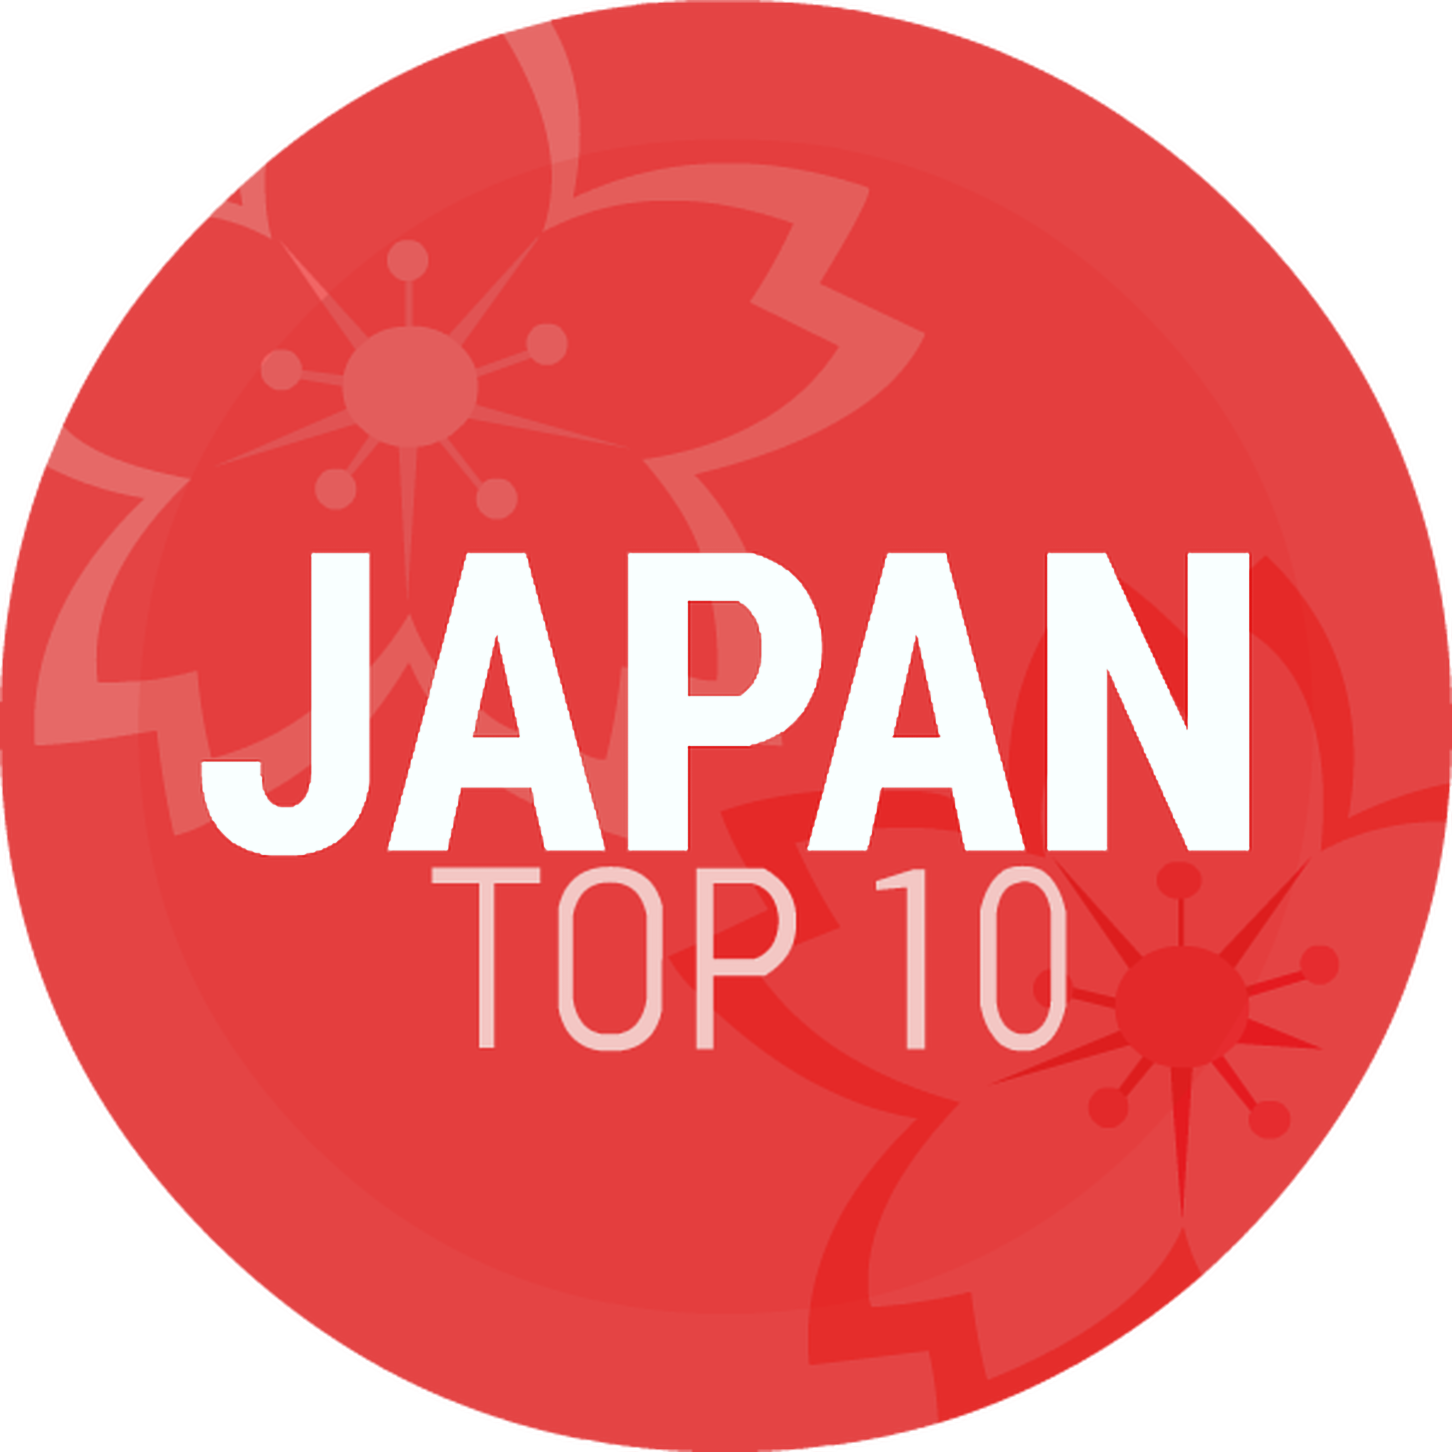 Episode 315: Japan Top 10 March 2020 Special: Feeling the Japanese hardcore punk